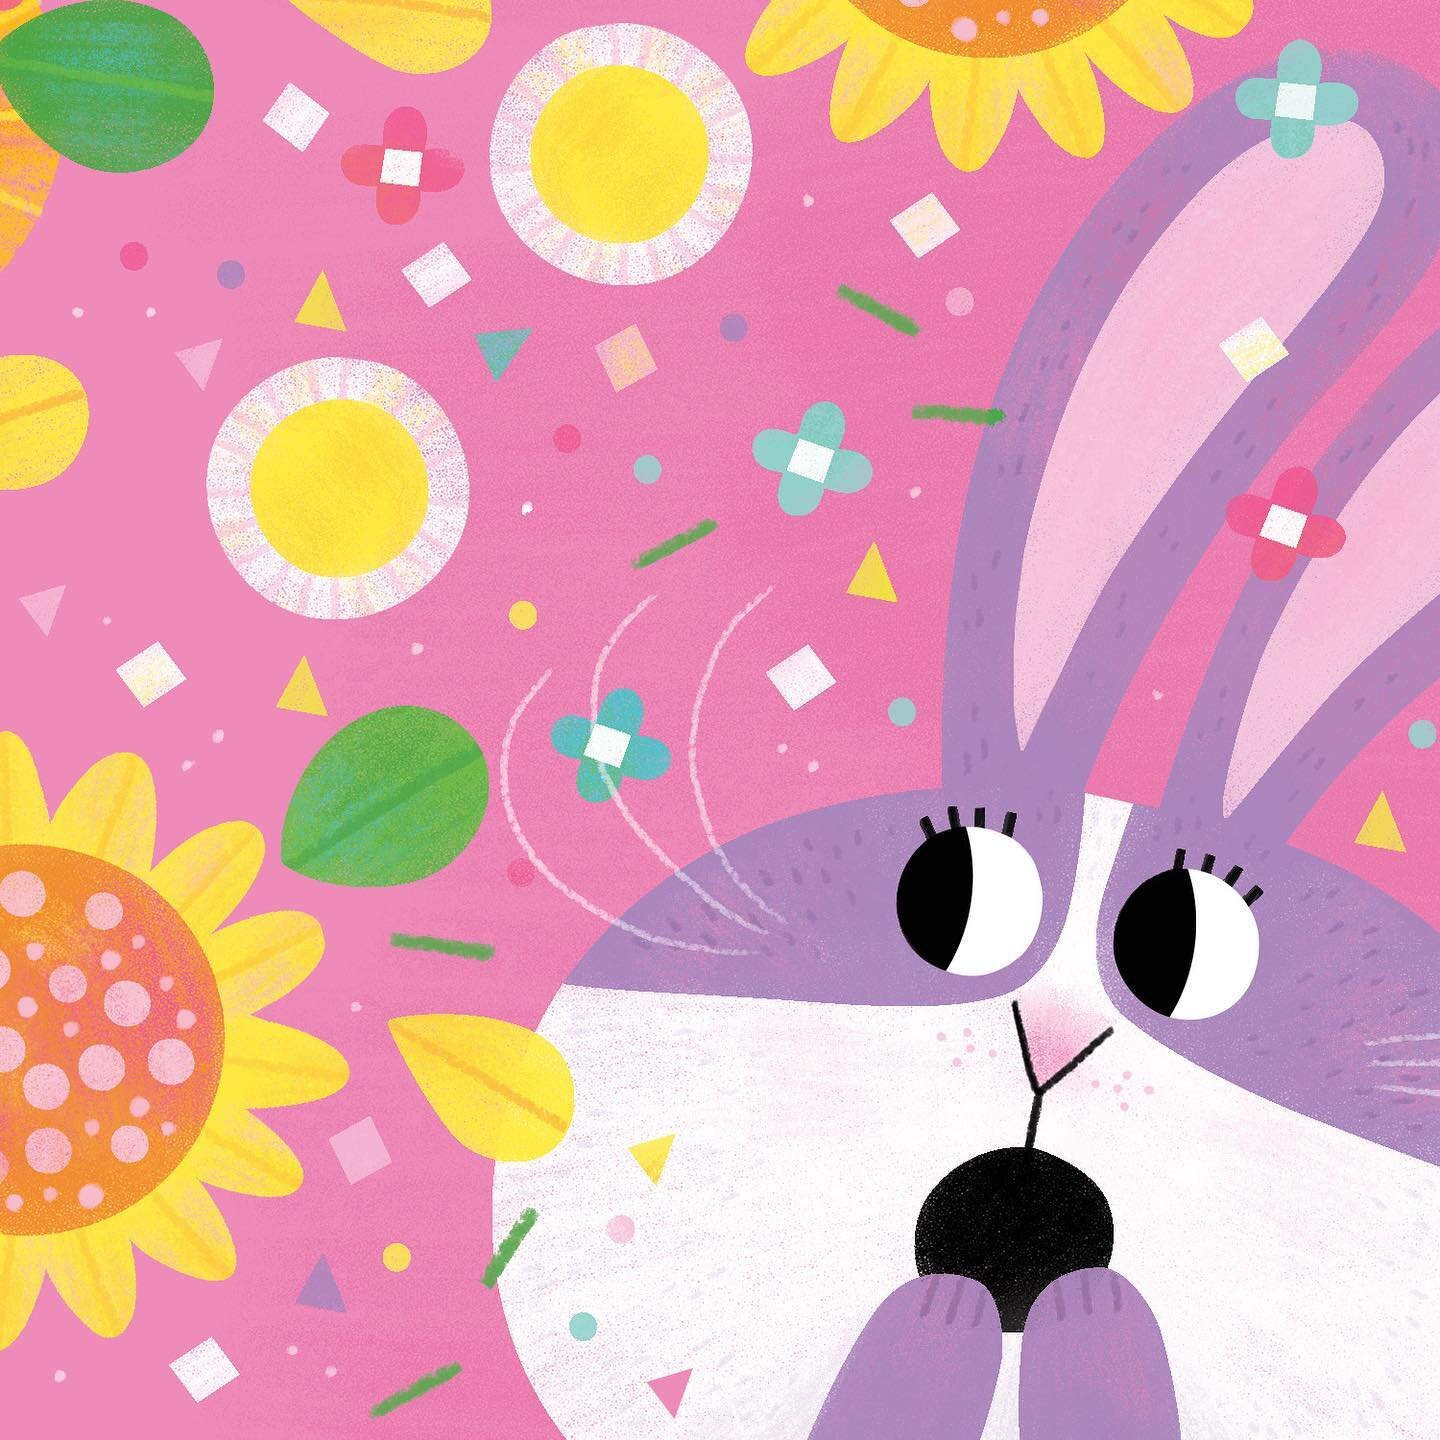 Only a few more days until Easter! 😱 Swipe to see the full scene from the &ldquo;chomp&rdquo; book &ldquo;Bunny Brunch&rdquo; that I illustrated with @littlebeebooks